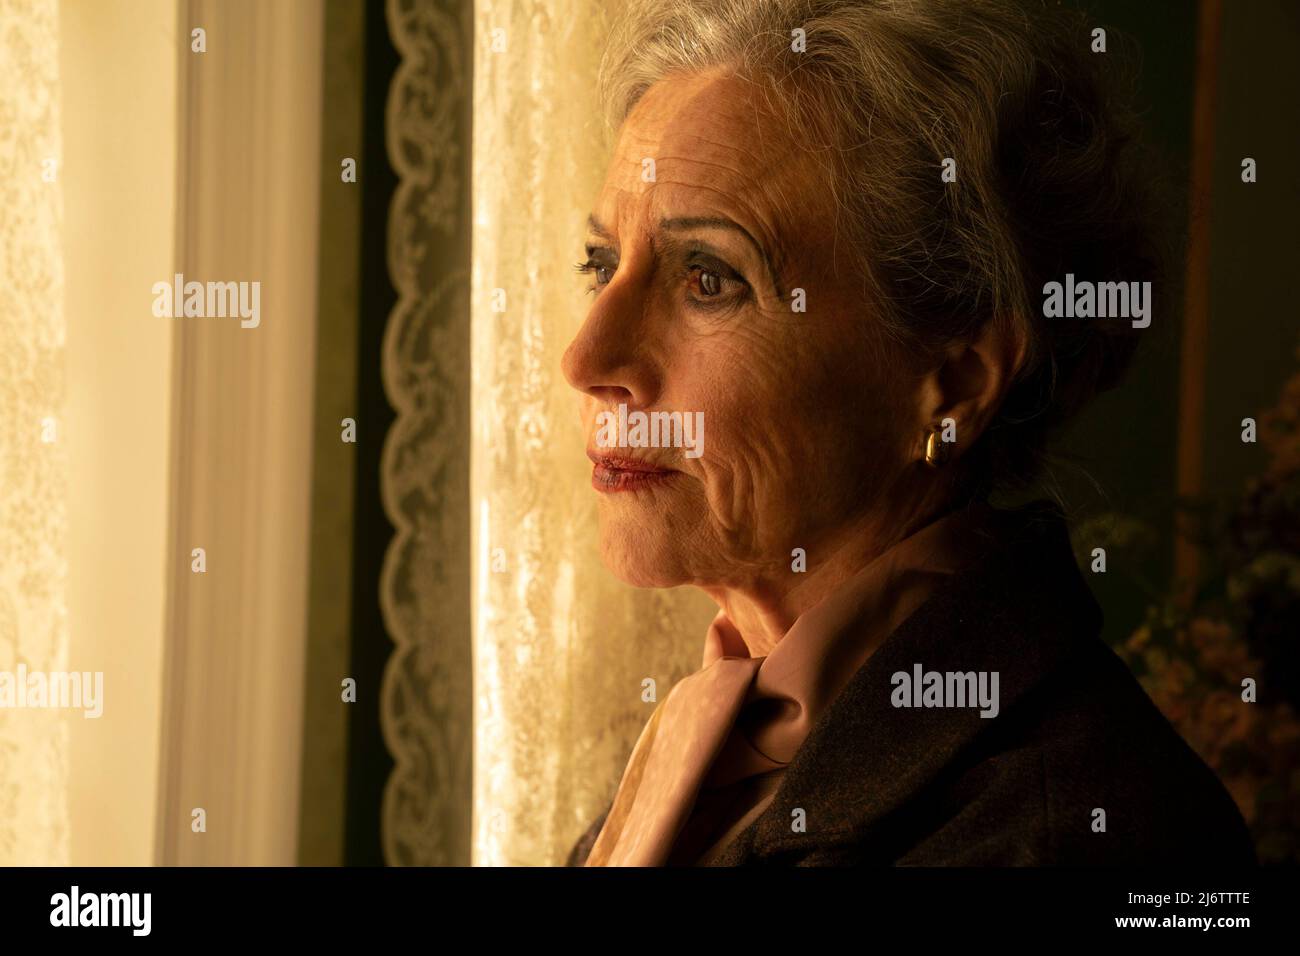 BIRTHE NEUMANN in THE PACT (2021) -Original title: PAGTEN-, directed by BILLE AUGUST. Credit: SF Studios / Album Stock Photo